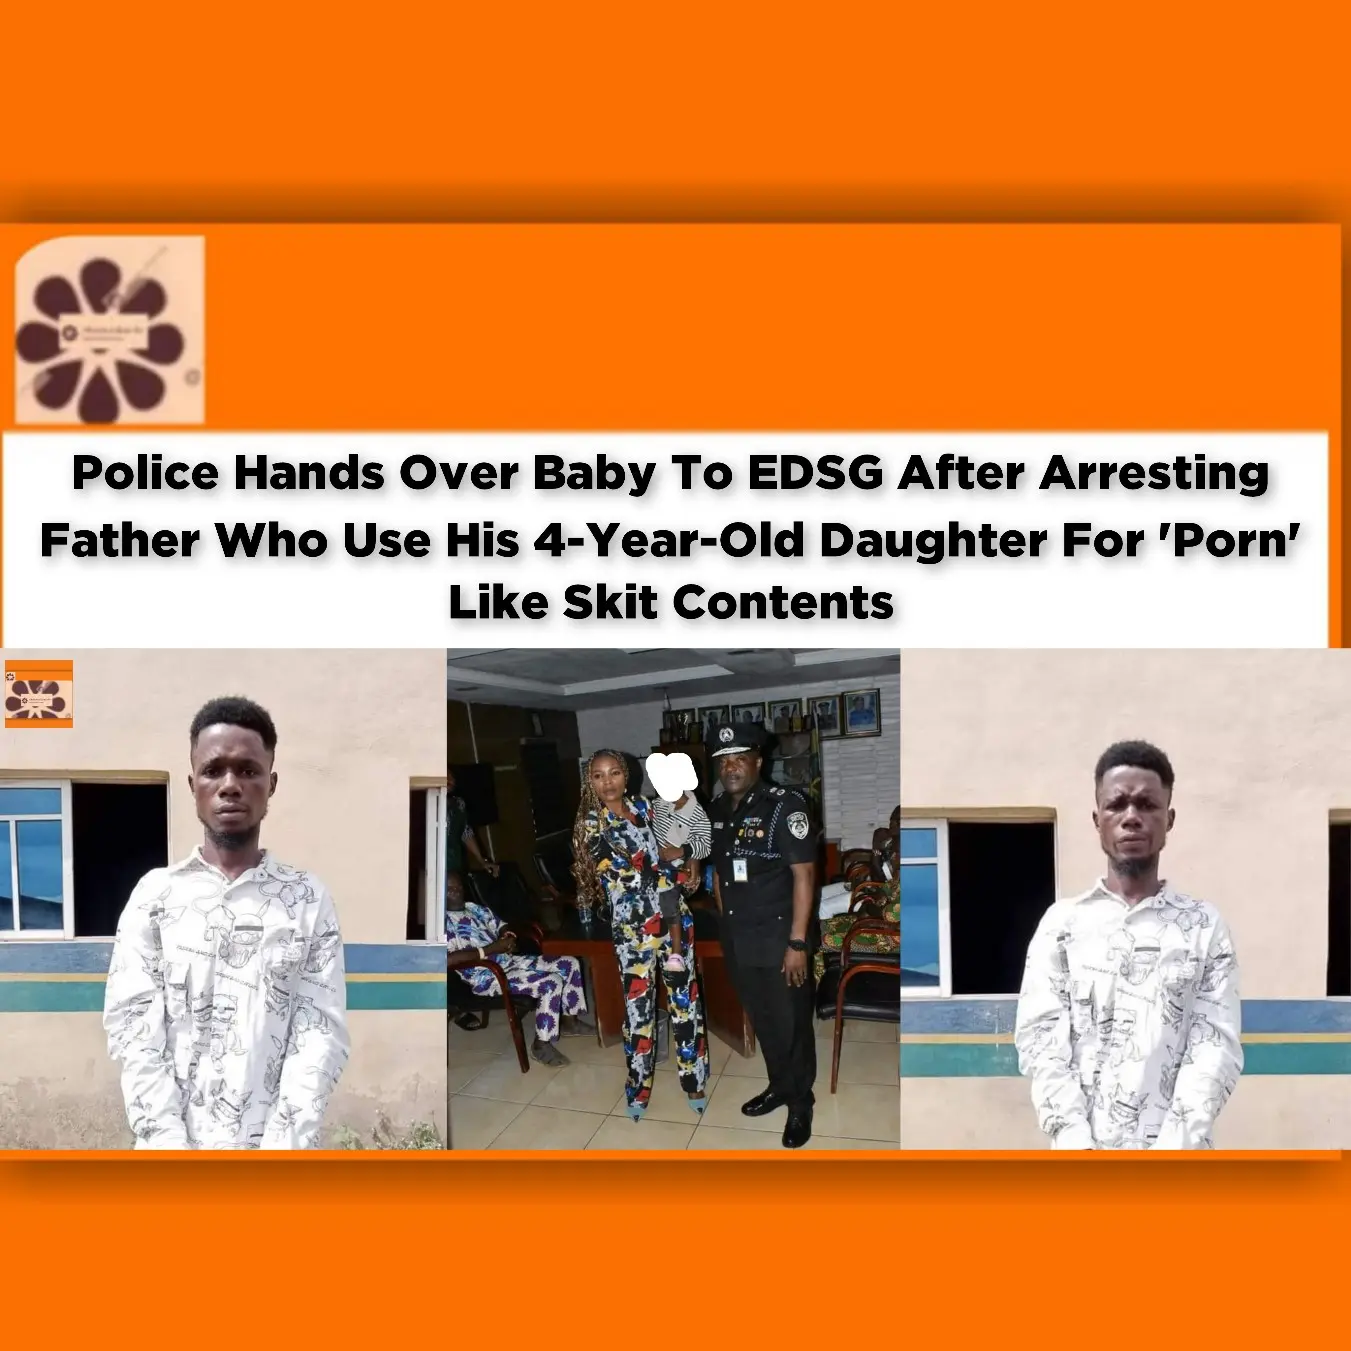 Police Hands Over Baby To EDSG After Arresting Father Who Use His 4-Year-Old Daughter For 'Porn' Like Skit Contents ~ OsazuwaAkonedo #Landlords